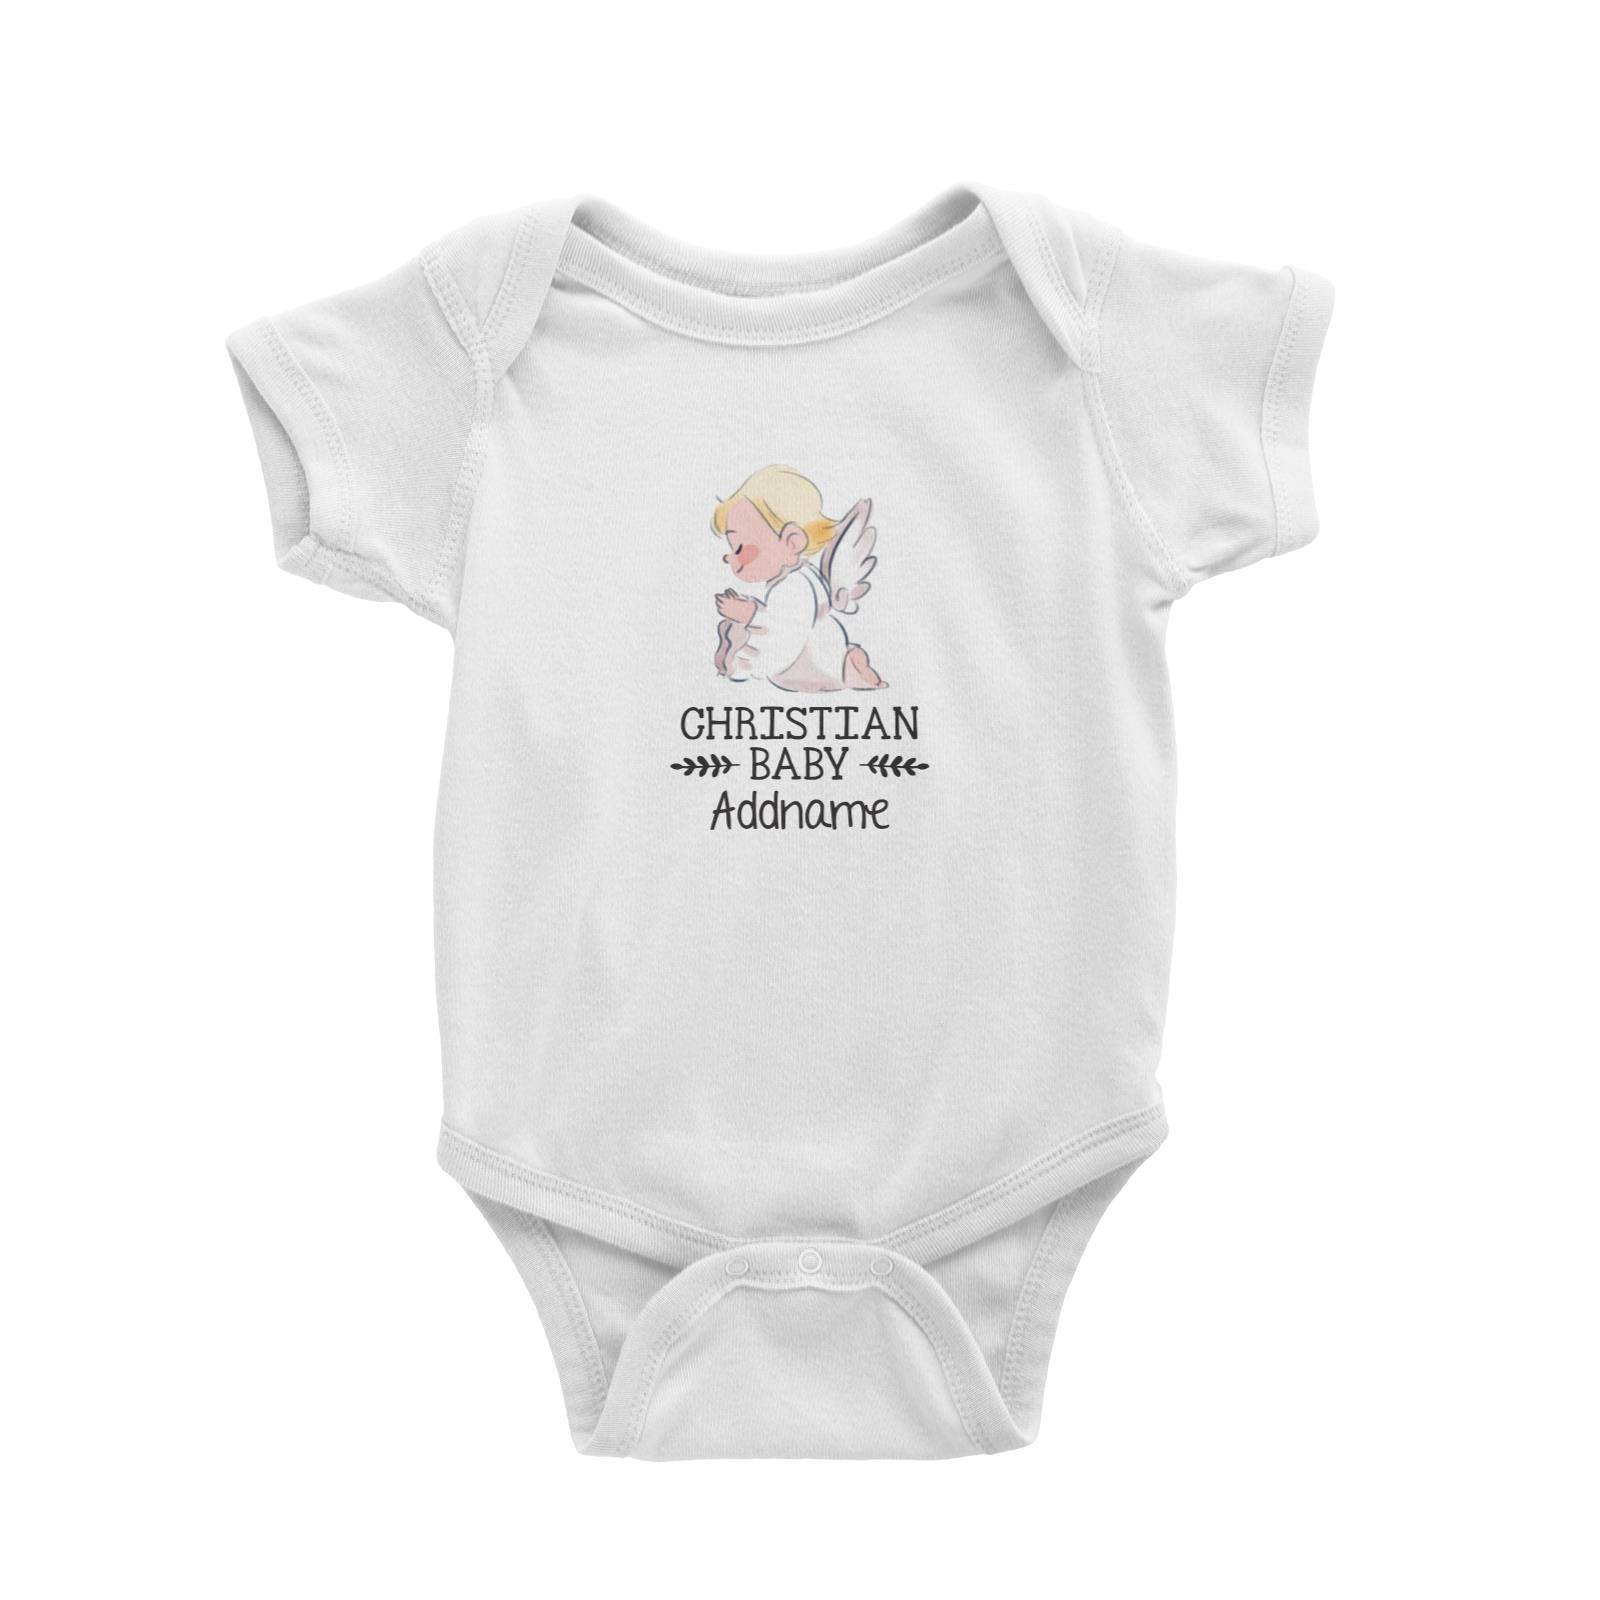 Christian Baby Angel Christian Baby Addname Baby Romper